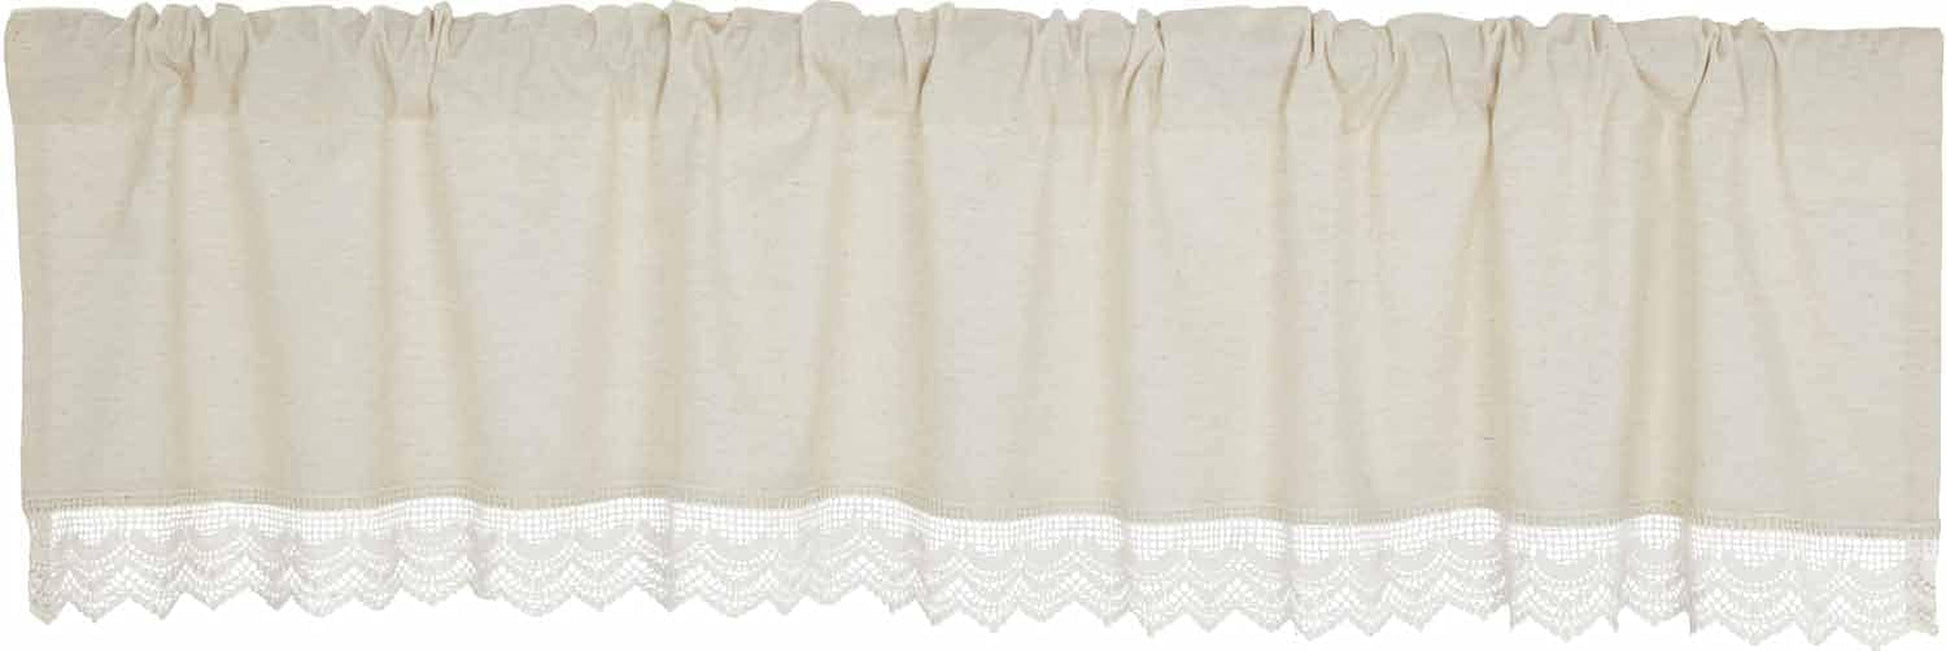 Piper Classics Flax and Lace Valance Curtain, 72" Wide, Natural Cream Window Topper W/Crochet Lace Trim, Vintage Farmhouse, Boho